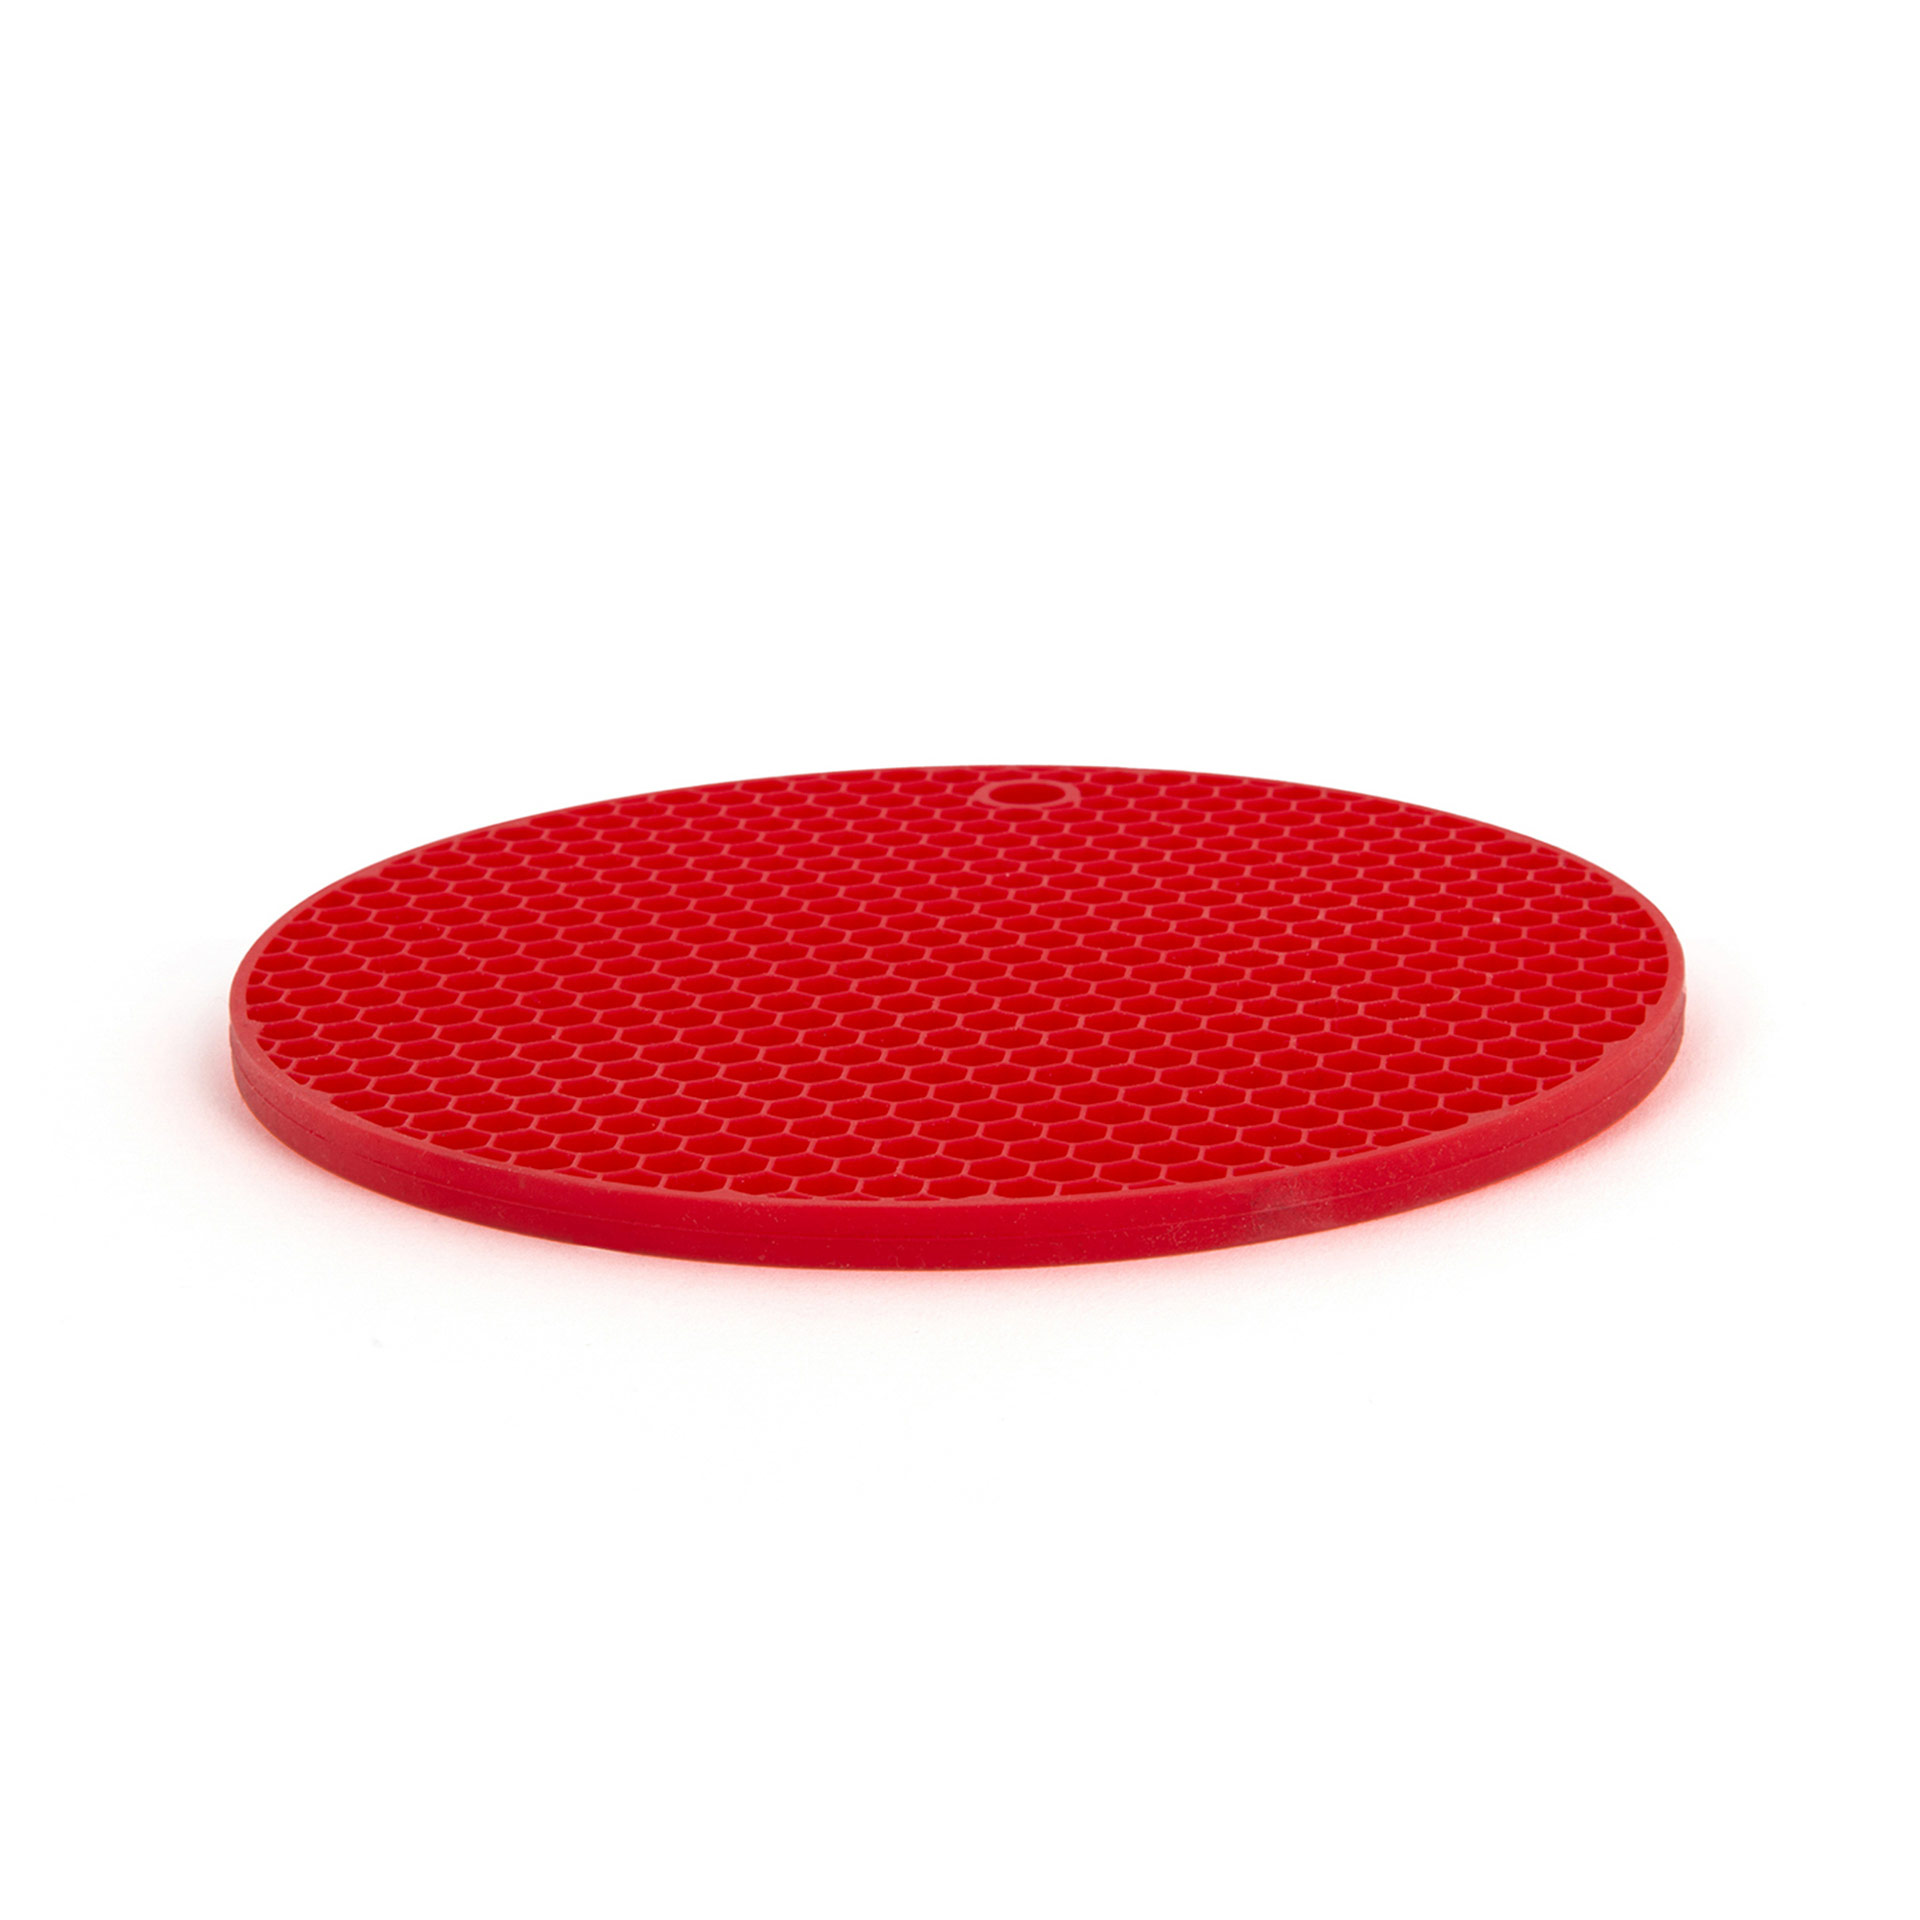 Sottopentola presina in silicone rosso, , large